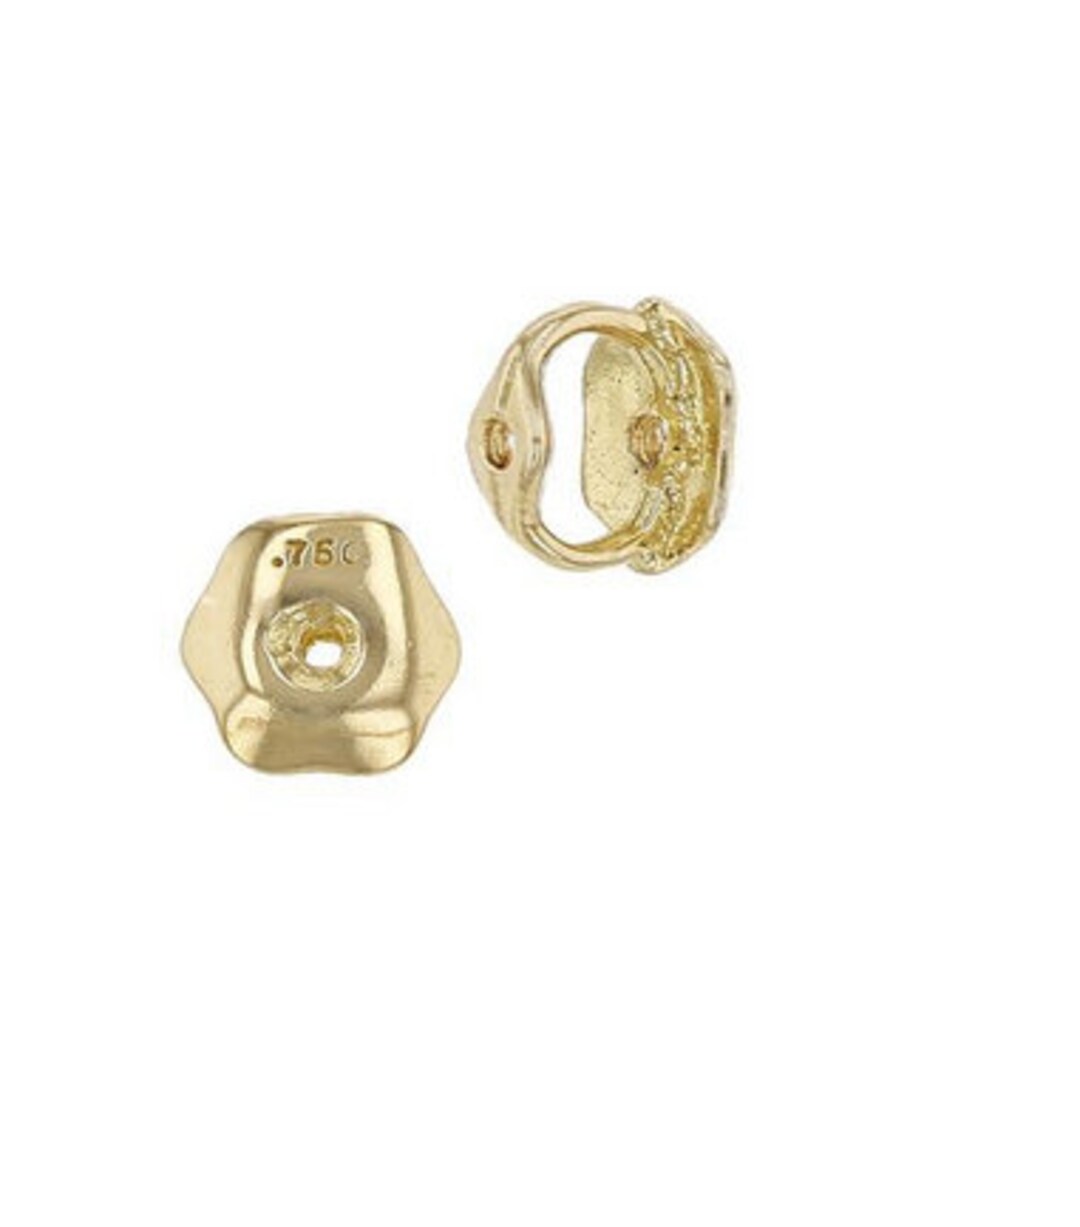 14K Solid Gold Replacement for Screw-back Stud Earrings / Earring